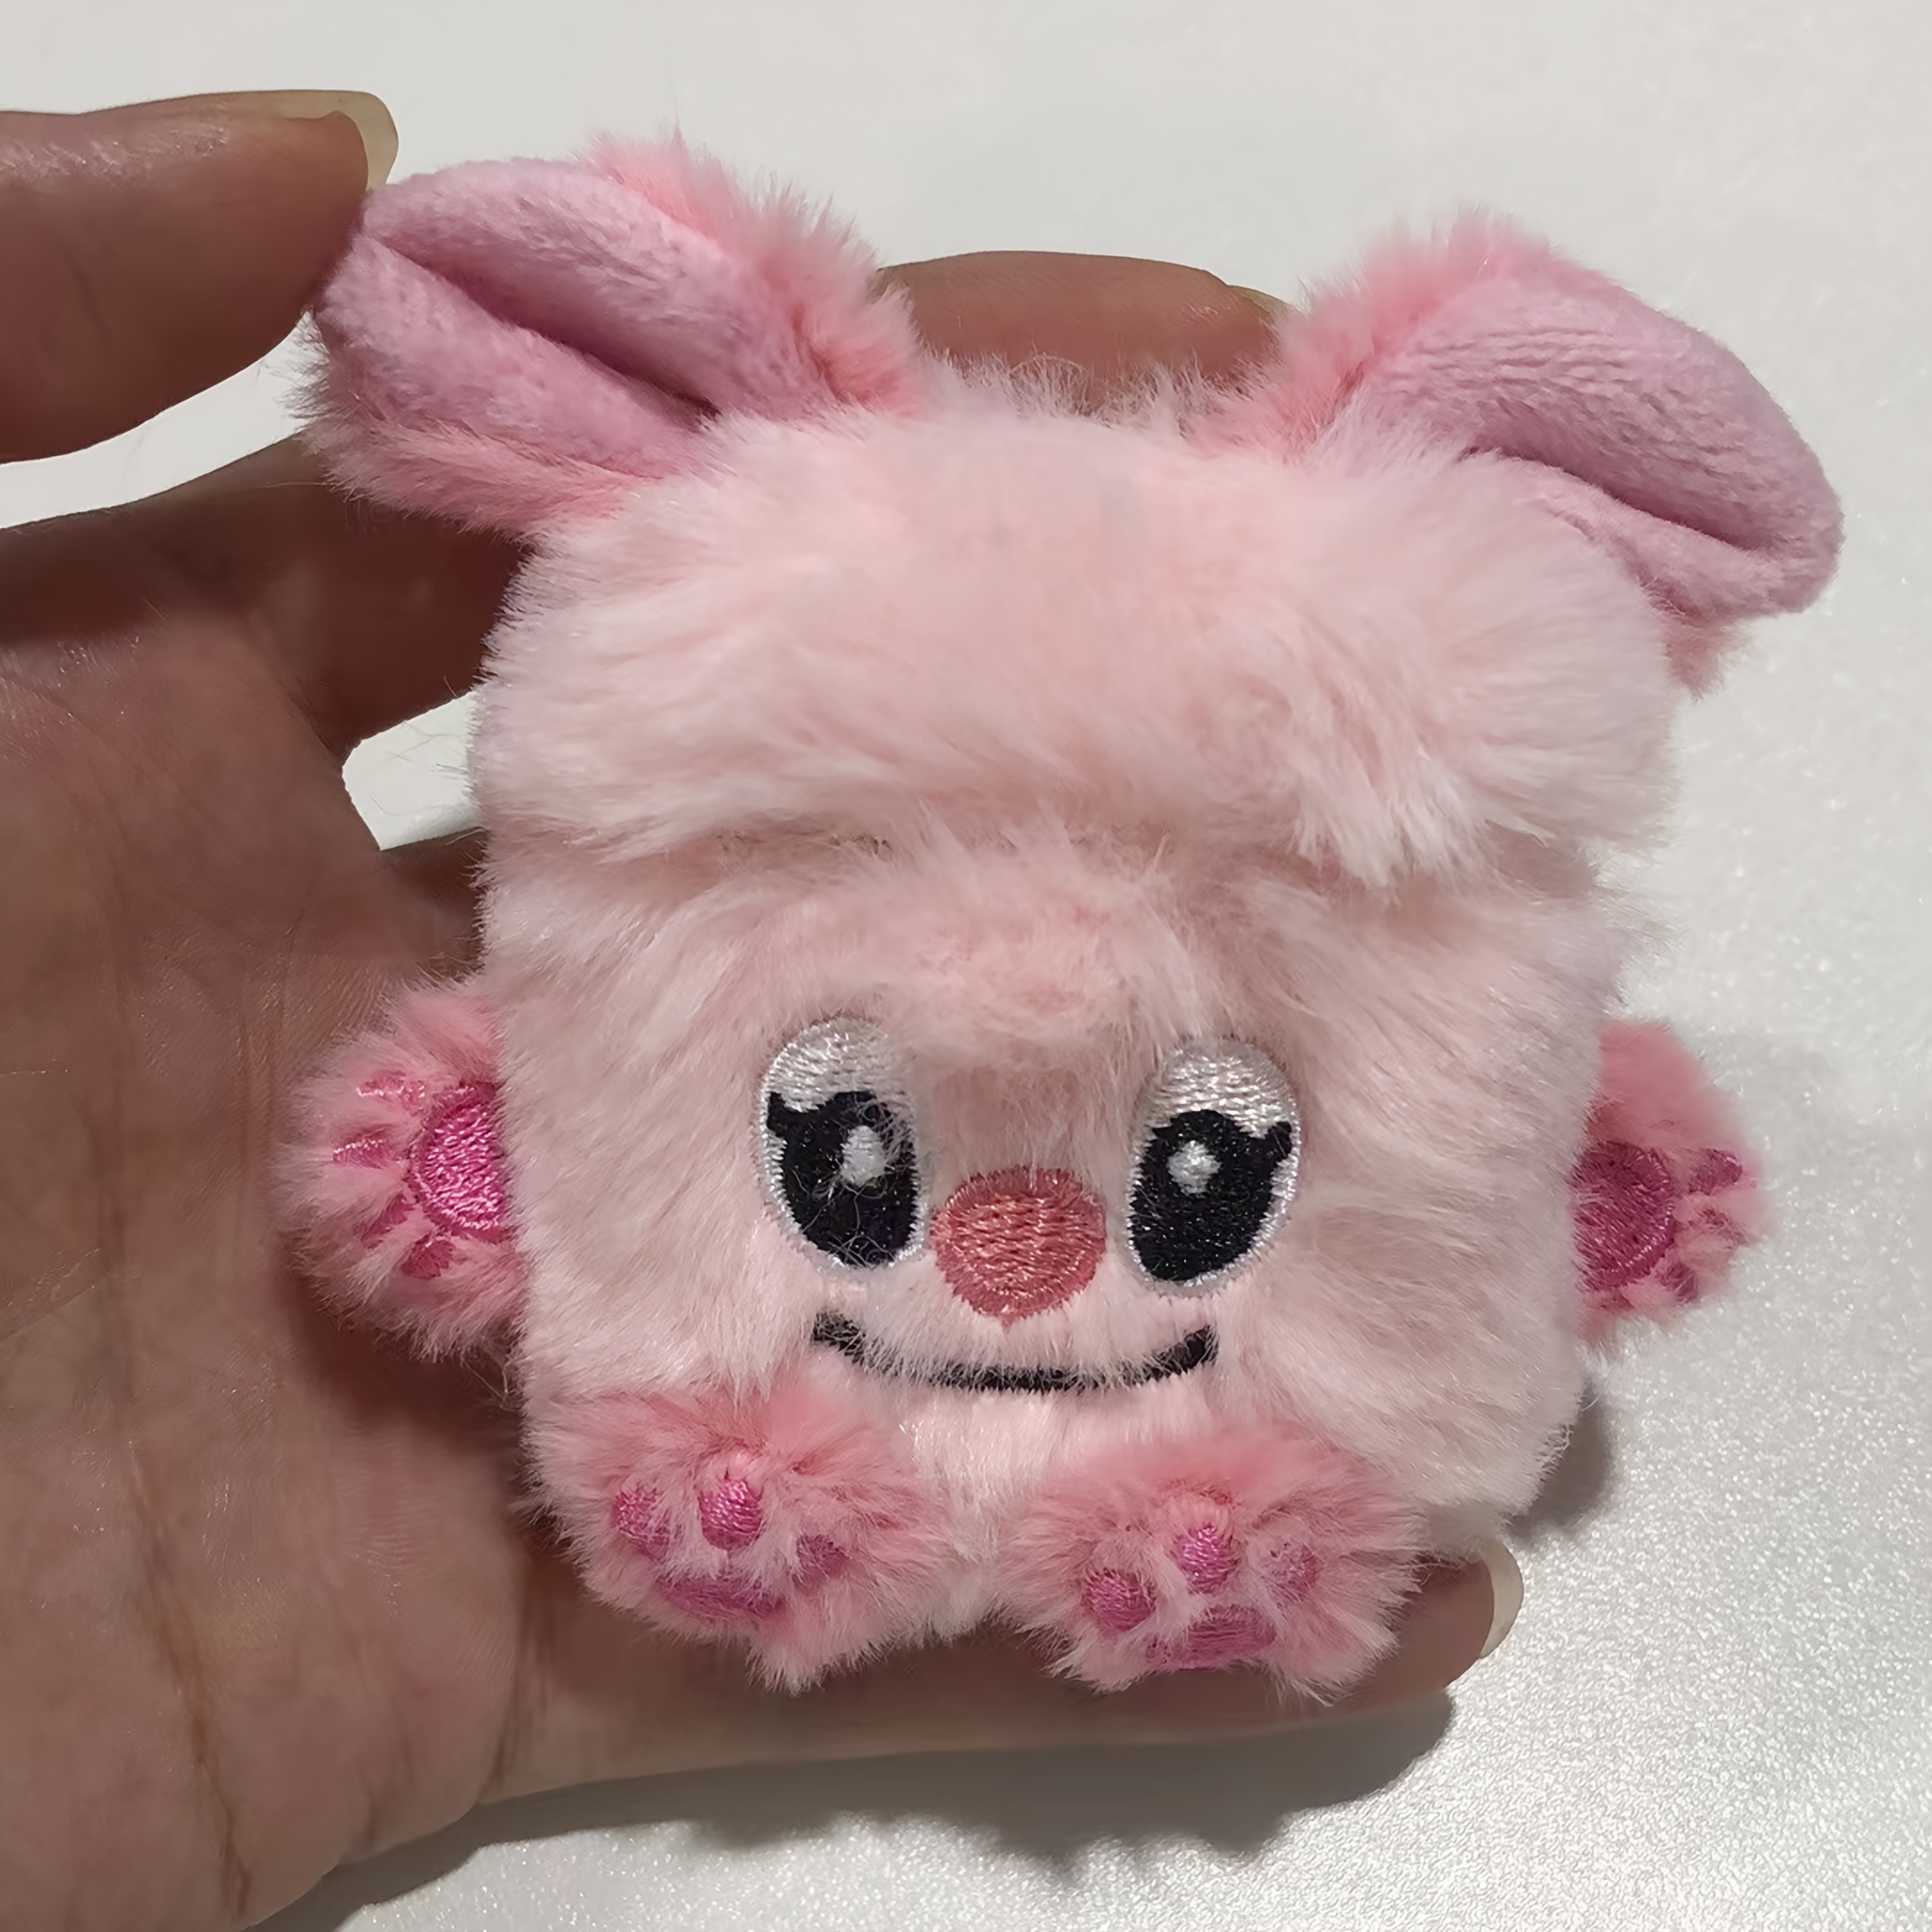 

Cartoon Cute Monster Plush Earphone Covers For Airpods 1/2/3, - Tpu Material, Soft Furry Protective Earpads For Girls And Couples - New Style